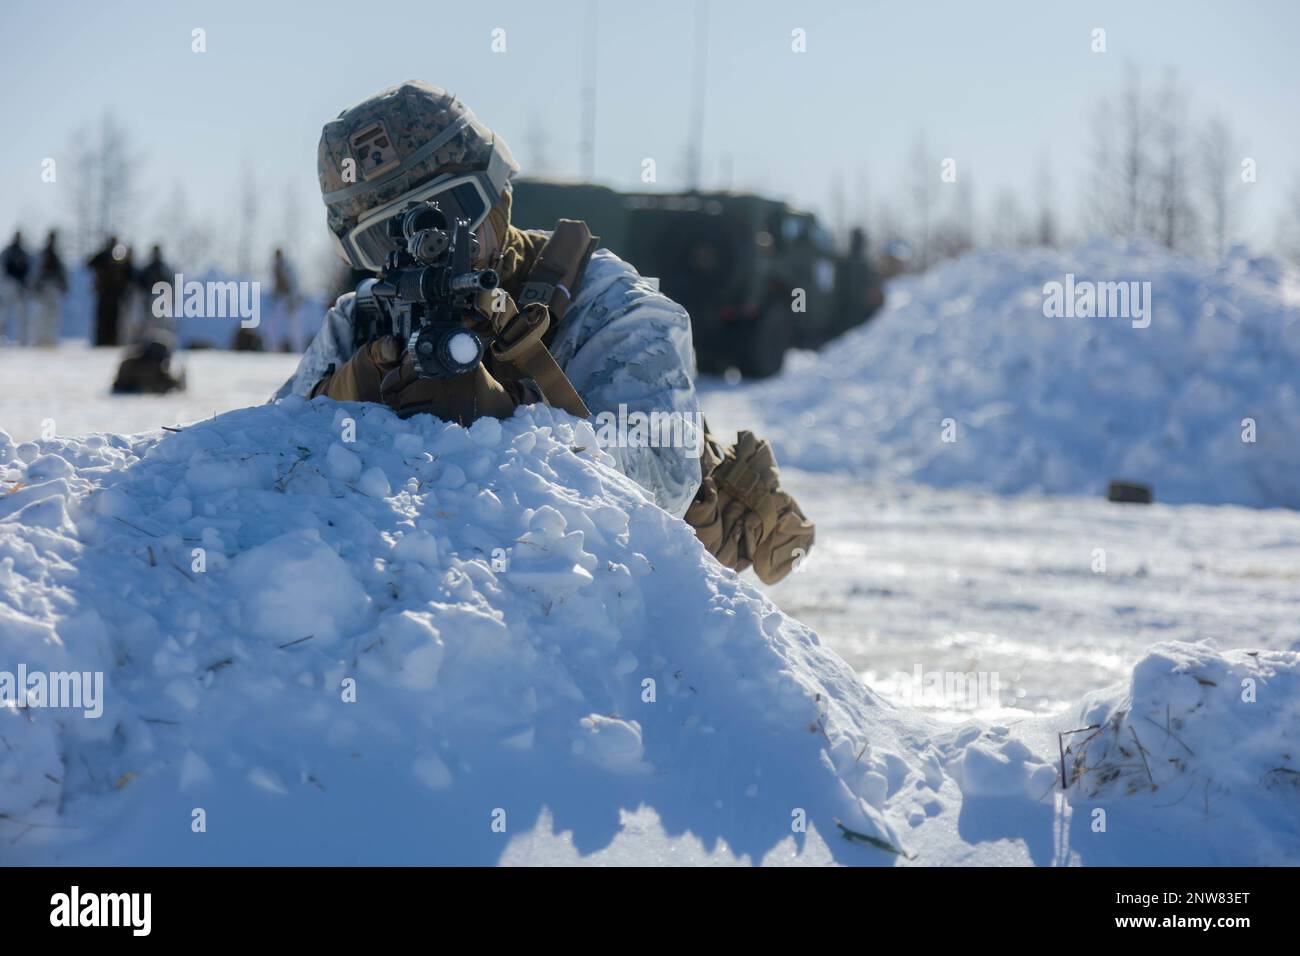 U.S. Marine Corps Lance Cpl. Brandon Nava, a supply administration and operations specialist with 3d Battalion, 12th Marines, posts security during Artillery Relocation Training Program 22.4 at the Yausubetsu Training Area, Hokkaido, Japan, Jan. 27, 2023. The skills developed at ARTP increase the proficiency and readiness of the only permanently forward-deployed artillery unit in the Marine Corps, enabling them to provide precision indirect fires. Nava is a native of El Paso, Texas. Stock Photo